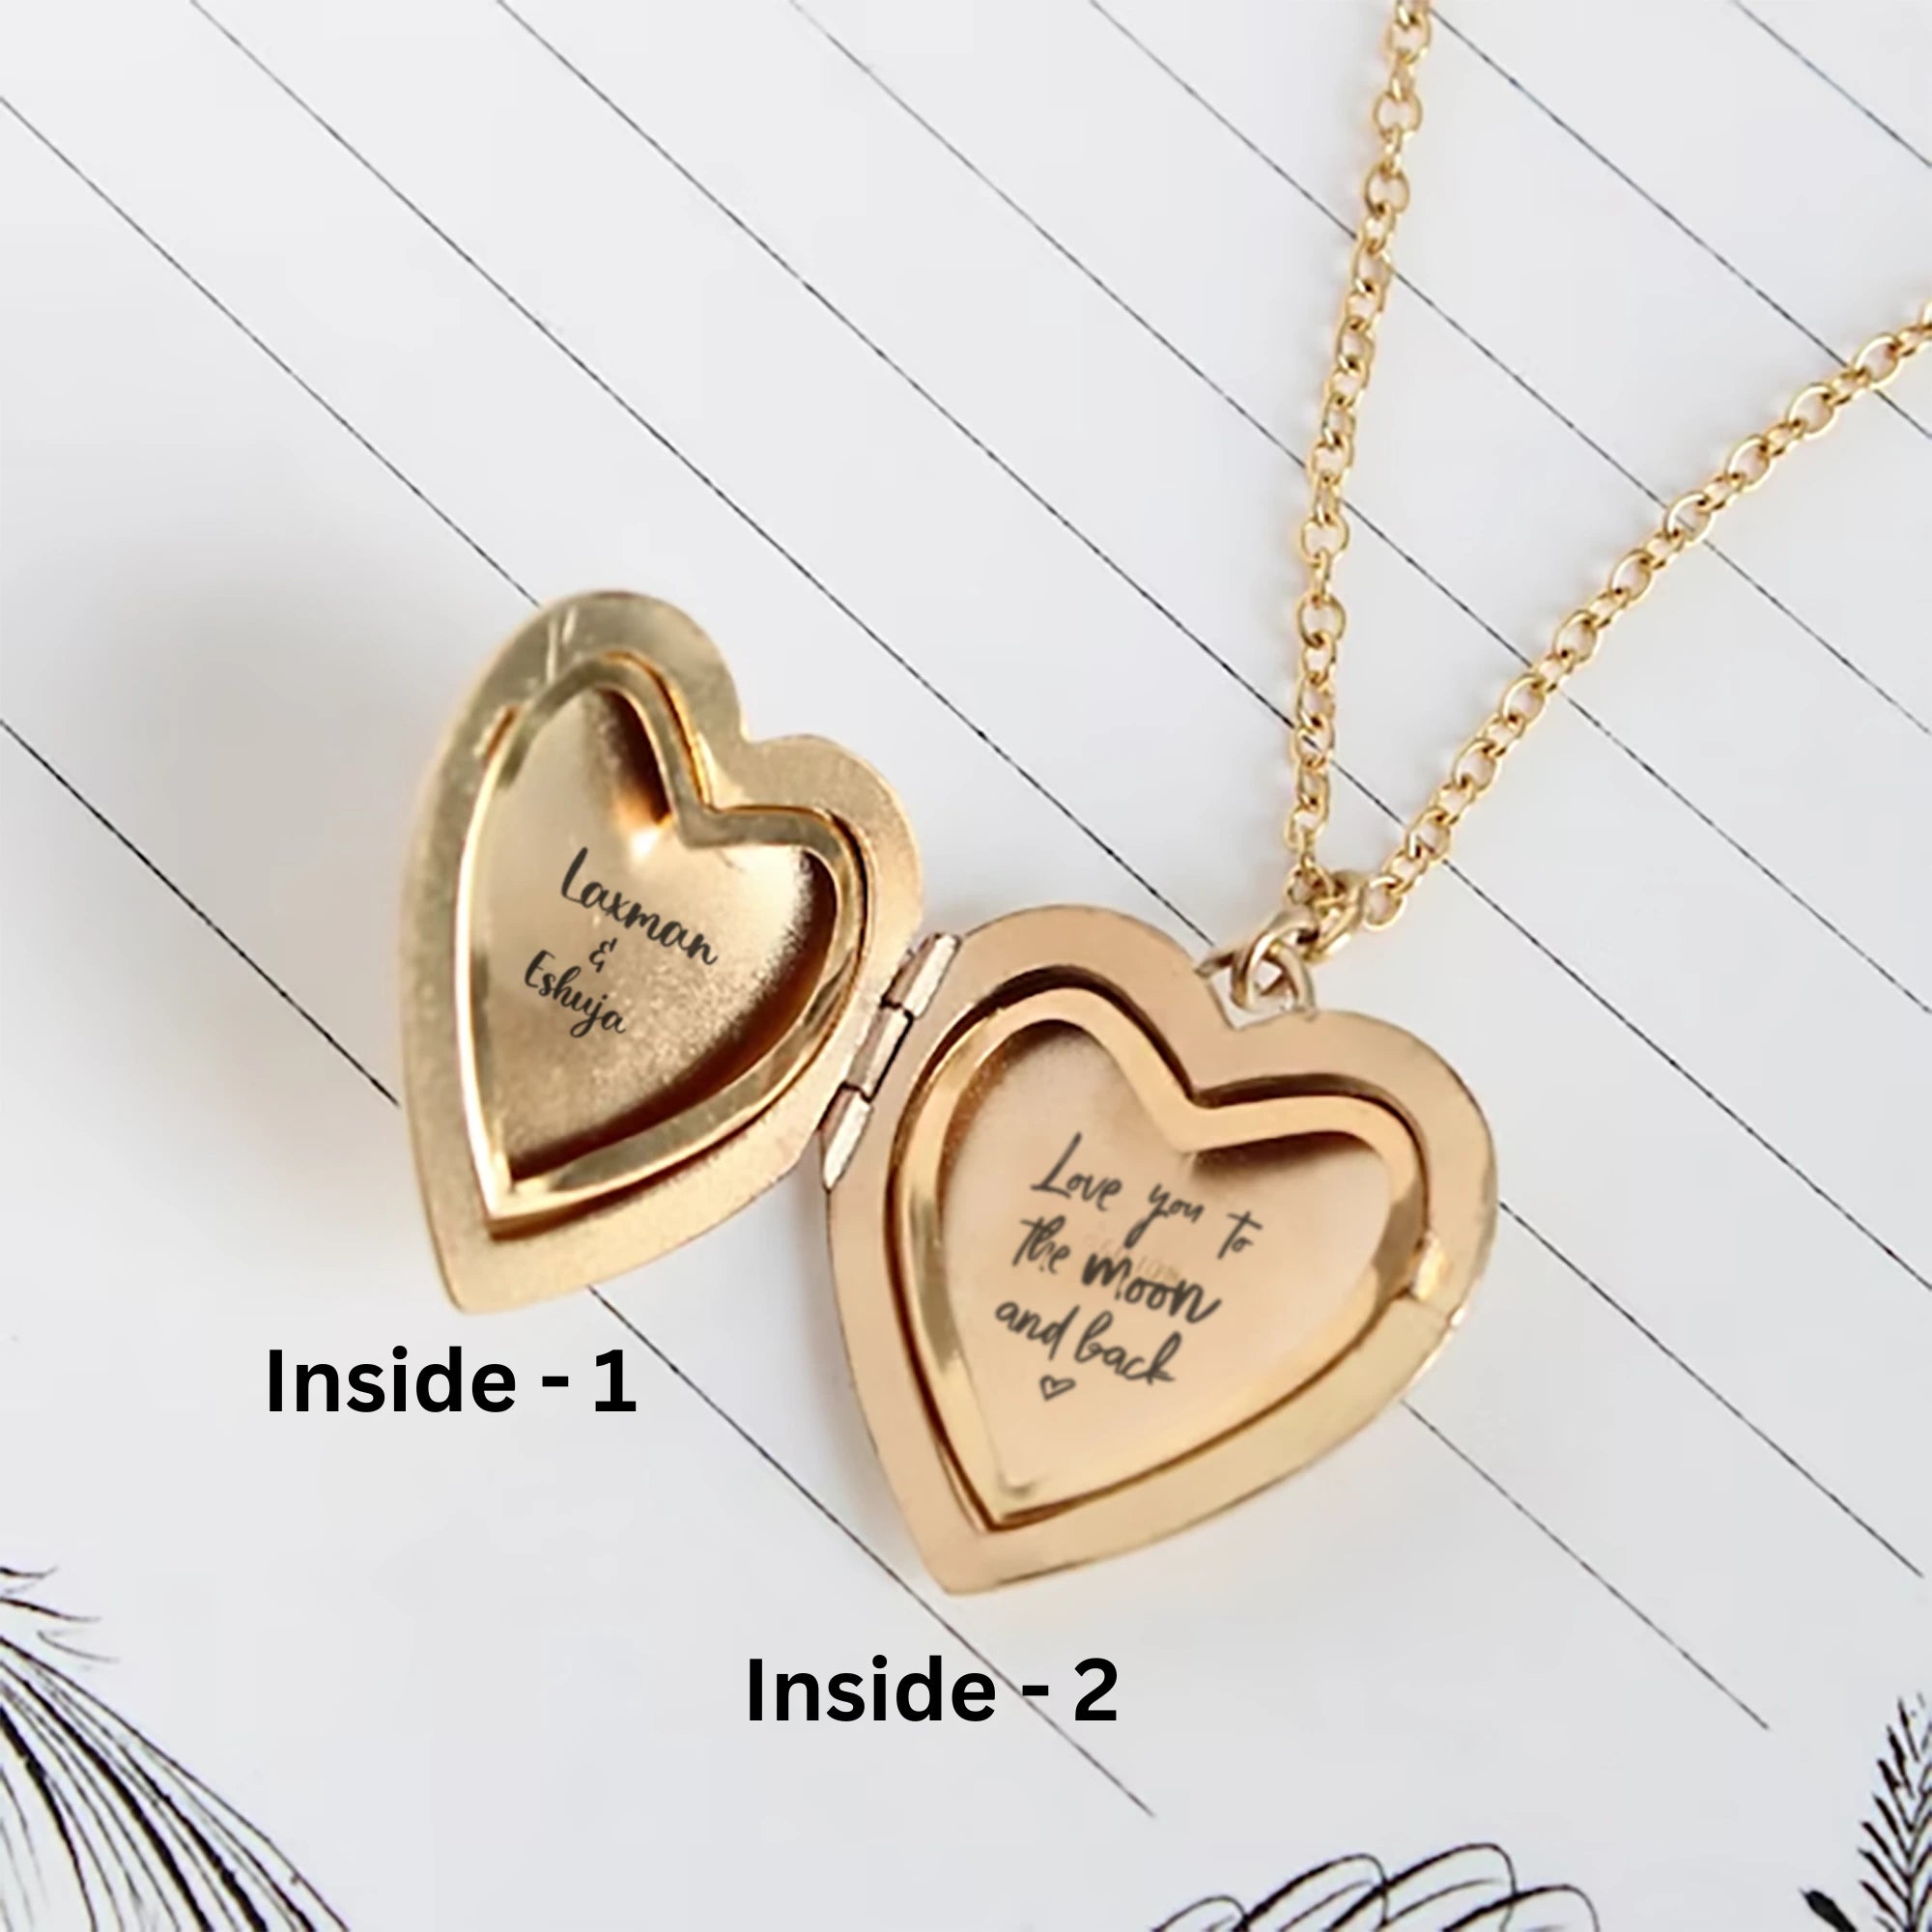 Christmas gift,Minimalist Jewelry,Pendant Necklace,couple keychain,couples necklace,engraved locket,gold heart locket,gold locket pendant,locket with photo,personalized gift,photo keychain,picture keychain,picture locket